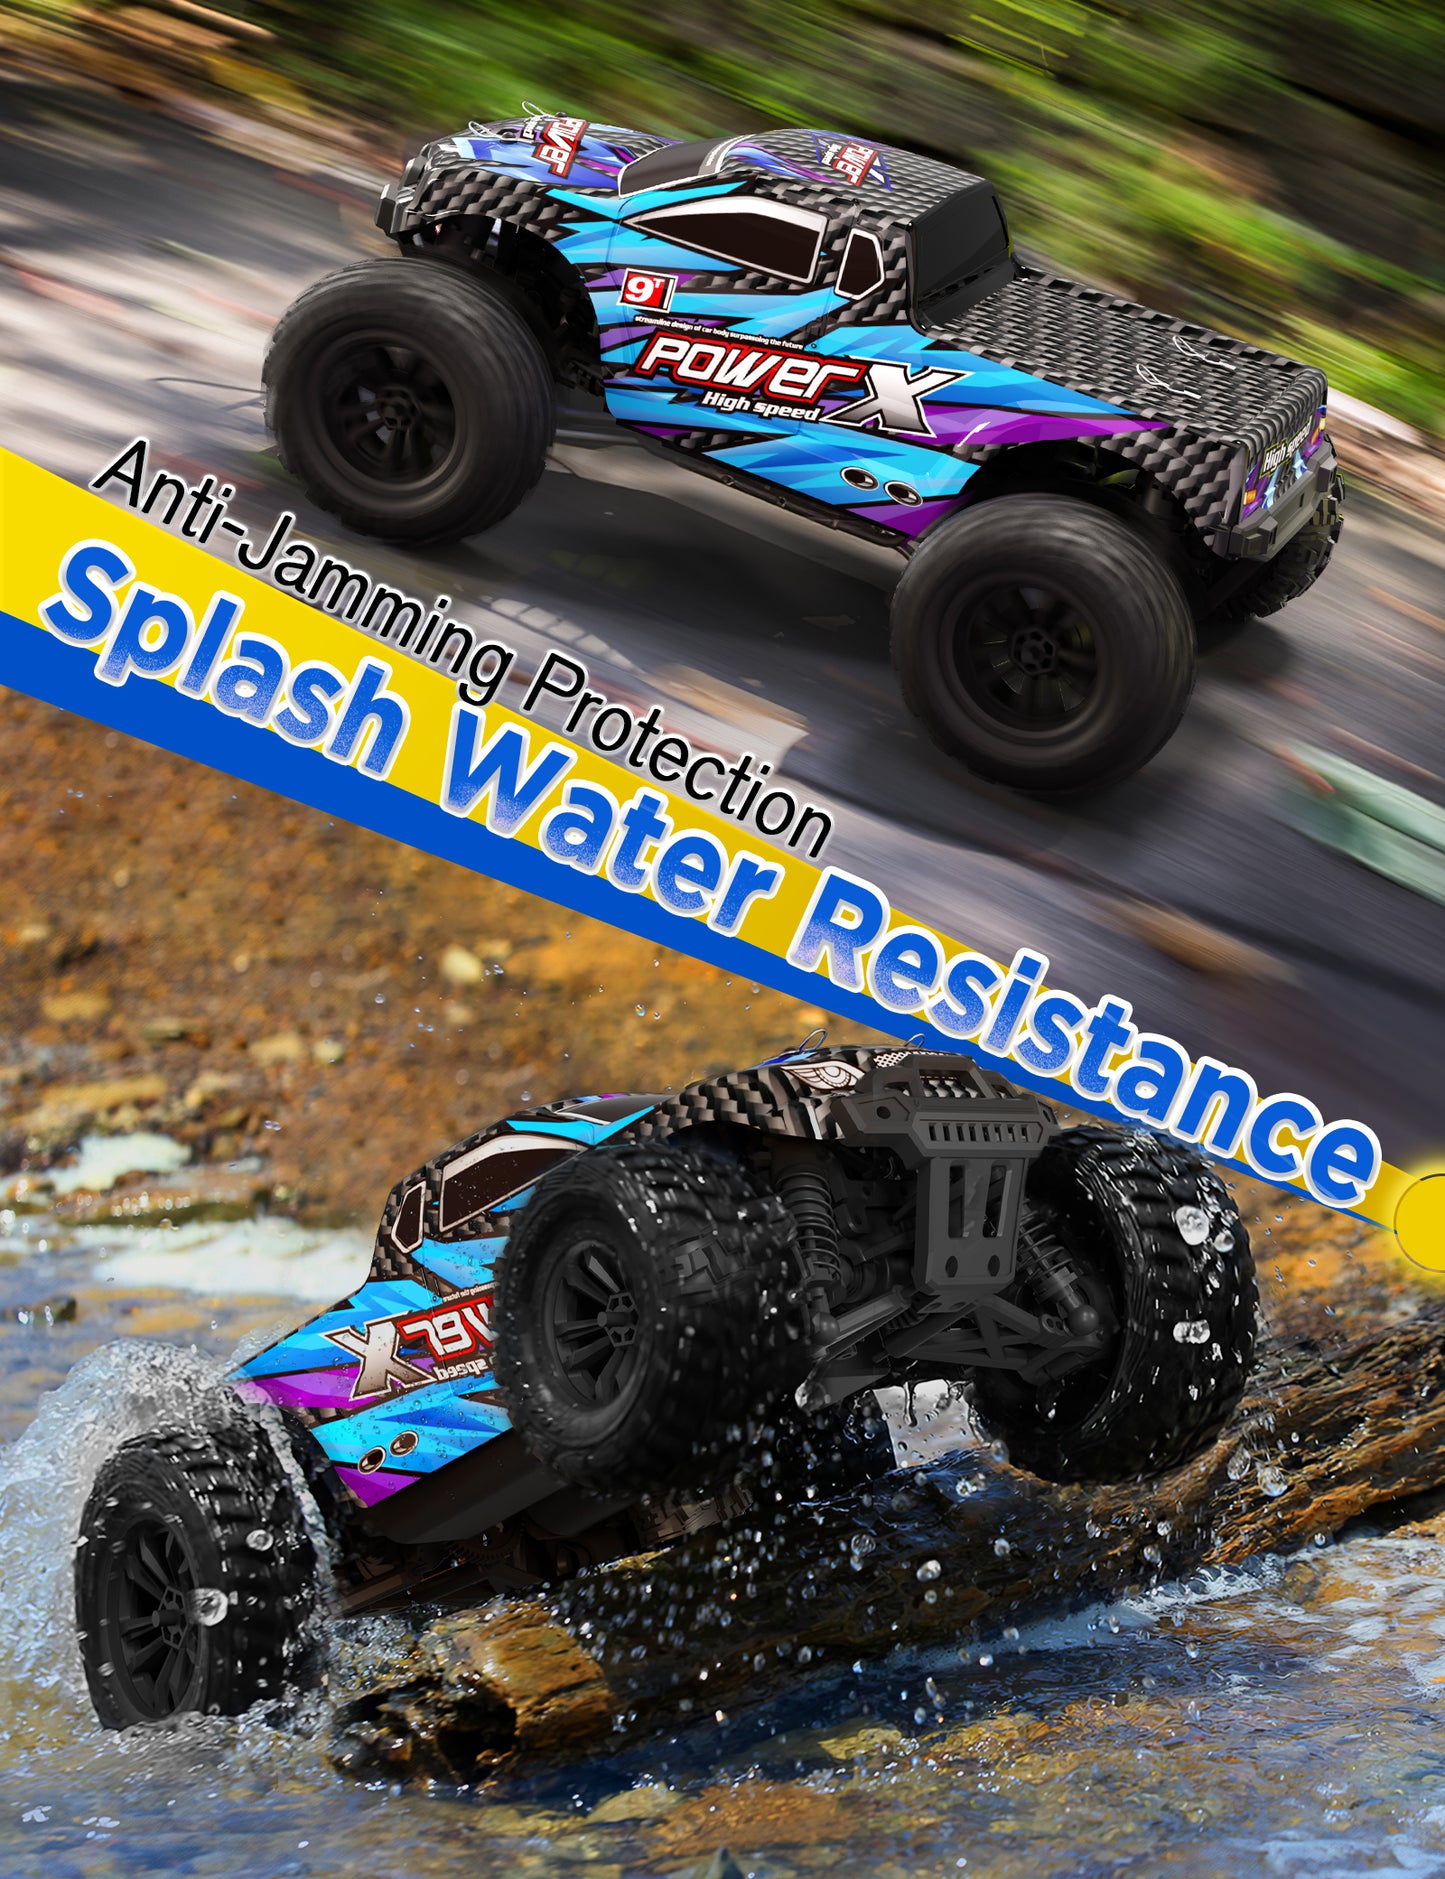 ASPEXEL RC Truck 1:18 High Speed w/2.4Ghz 4x4 Waterproof Off Road LedLight and Two Rechargeable Batteries for Kid, Adult